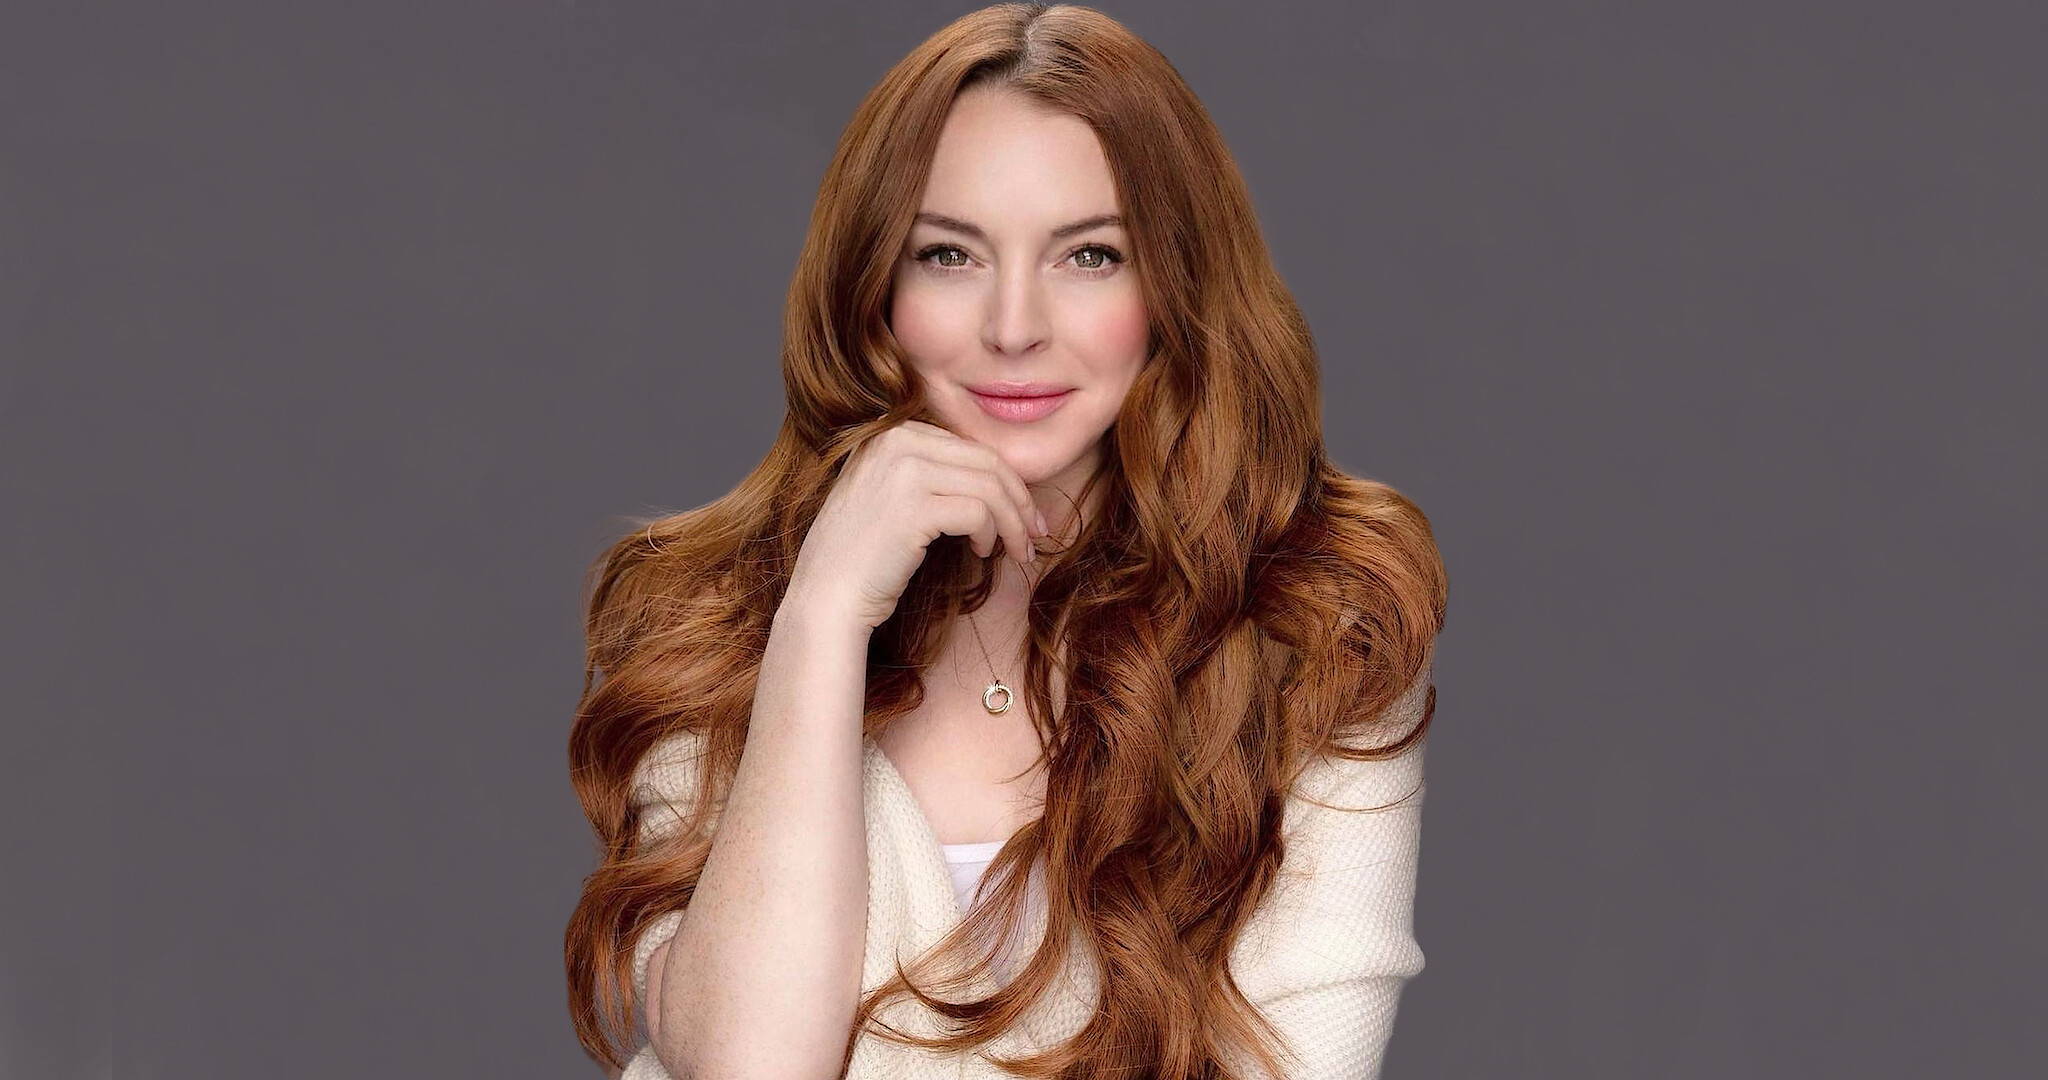 ana andreea recommends Lindsay Lohan Getting Fucked